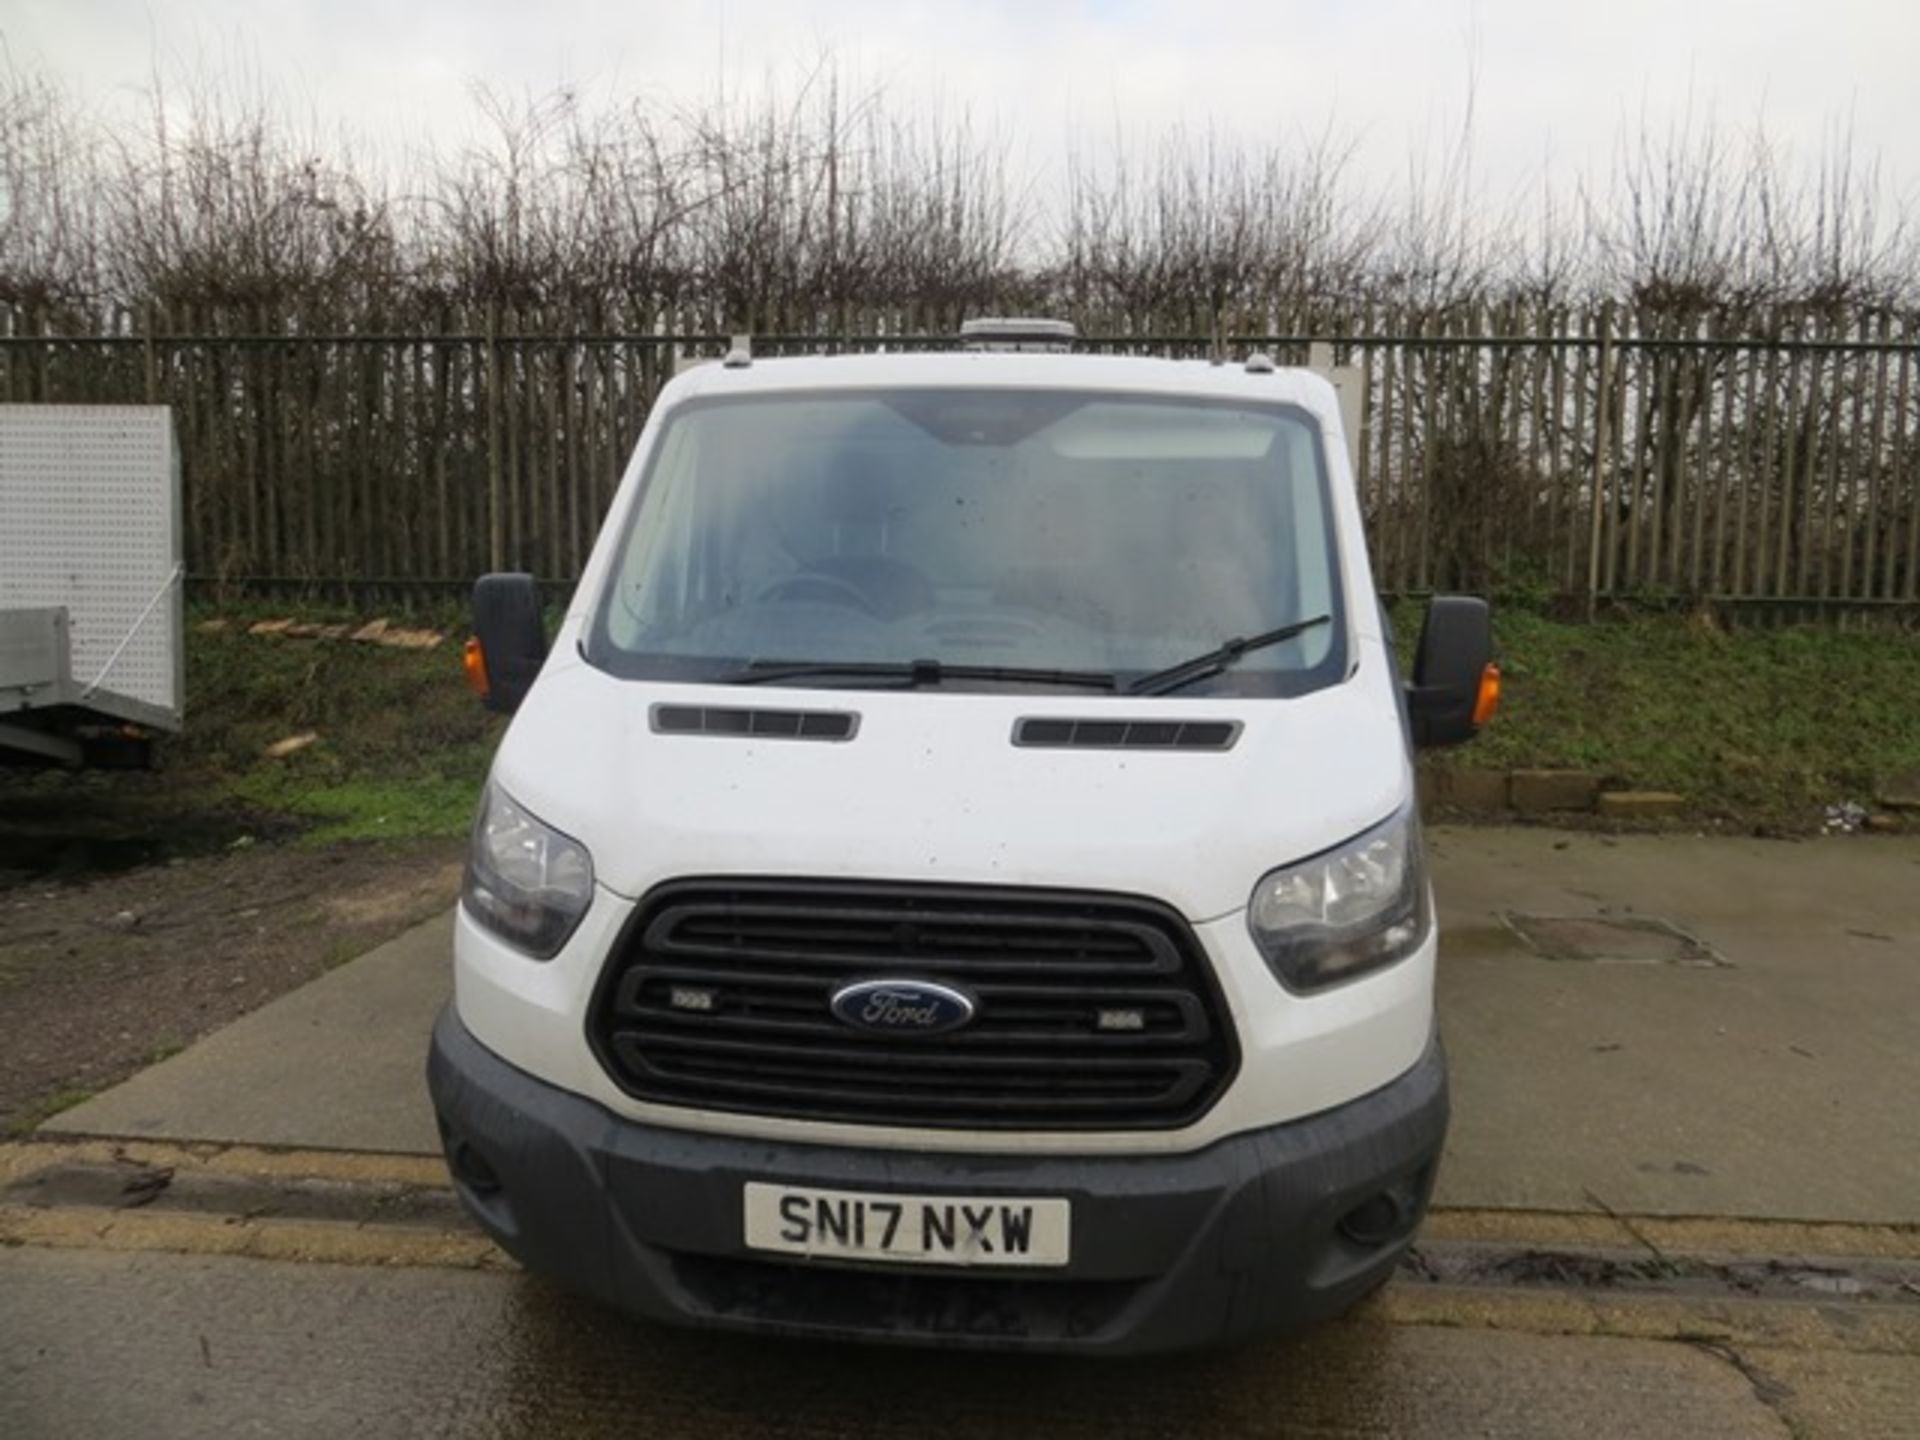 Ford Transit 350 L3 RWD diesel drop side twin wheel lorry with beaver tail. Registration Number SN17 - Image 2 of 10